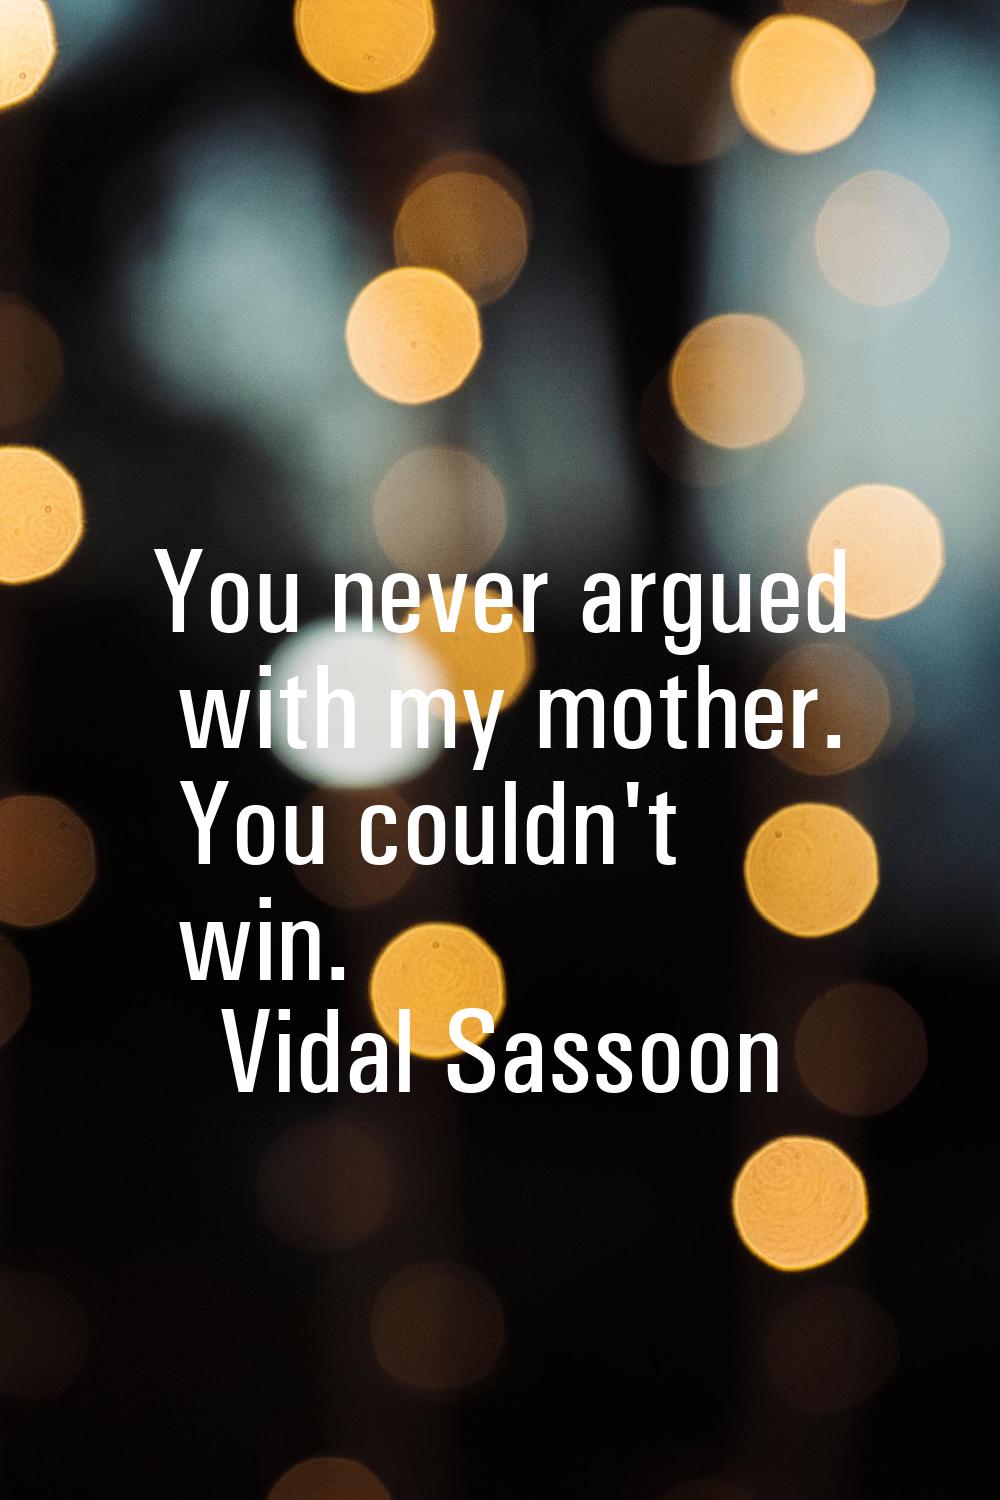 You never argued with my mother. You couldn't win.